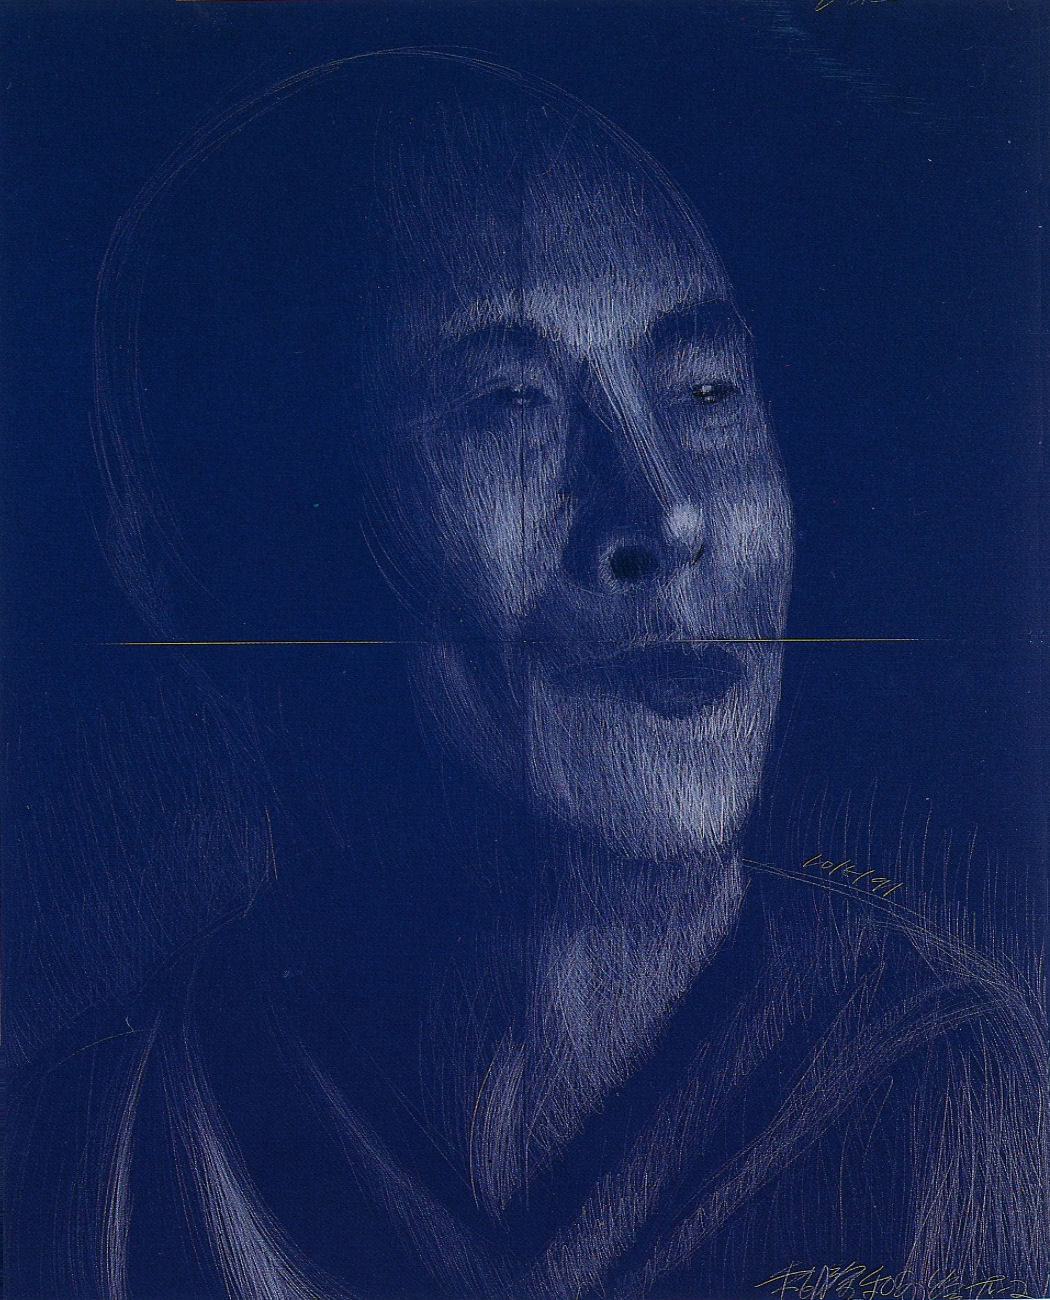 Tu-2's iconic, monumental four-sectioned portrait of the Dalai Lama, an earlier work,  fairly vibrates with emotions  it's electrically charged with compassion, radiant with love, hypnotic with serenity.   The artist's painful journey from a tortured period to his hard-won, transcendent transformation is etched in every line, and all this is communicated directly into the viewer's higher emotional center by some powerful magic... You feel it with all of you, all at once.  Infused with wisdom, compassion, humor and timelessness, like the Dalai Lama himself, the conscious art behind the "simple" silver lines illuminating the subject's inner qualities on a midnight sky-dark background is like a punch in the gut... it galvanizes you into the moment and changes your breathing. 